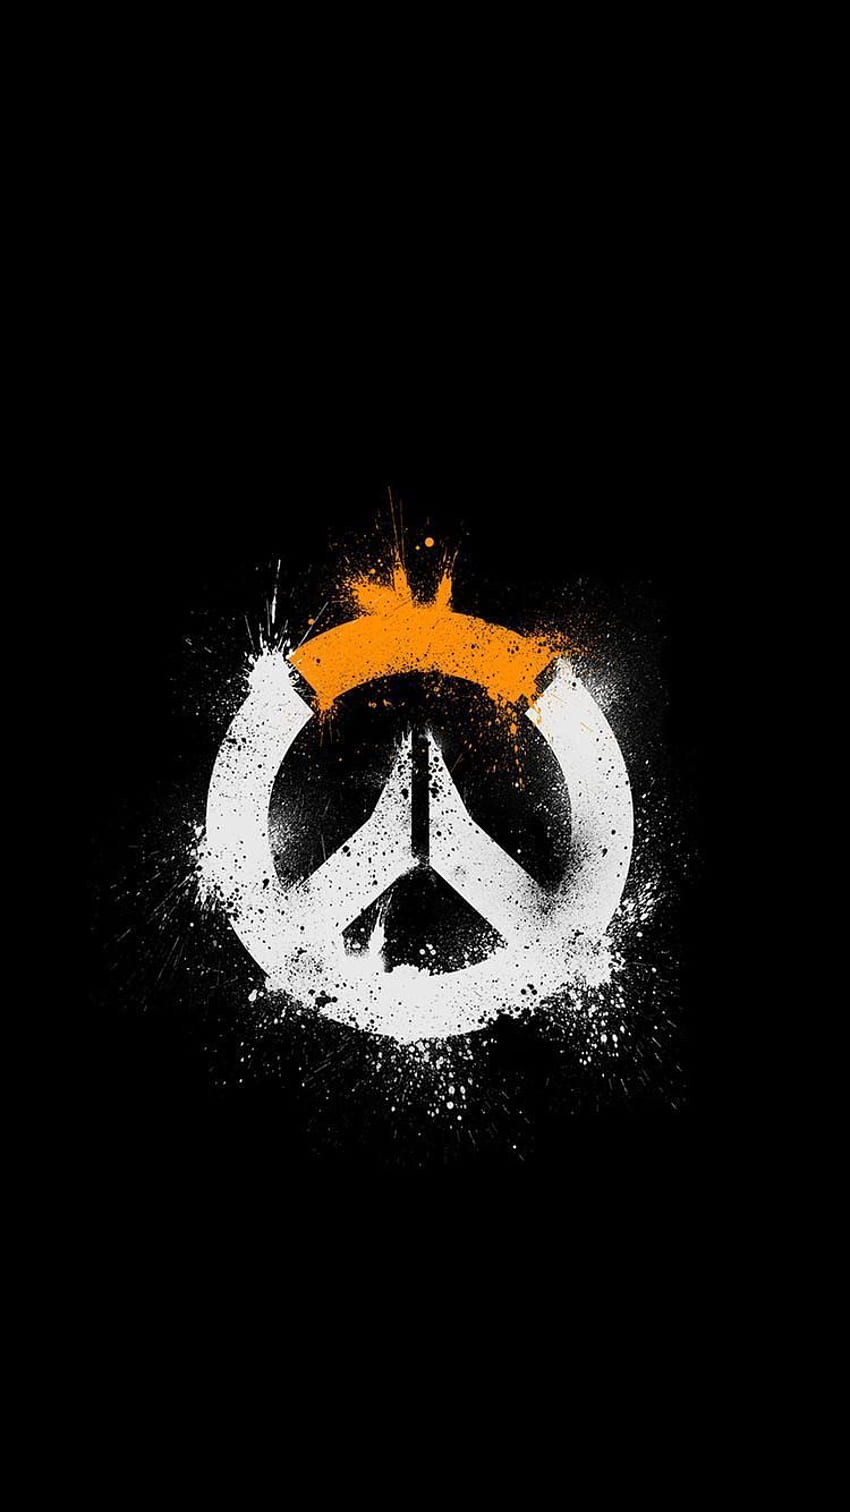 Wallpaper overwatch, all girl, collage desktop wallpaper, hd image,  picture, background, f478a3 | wallpapersmug